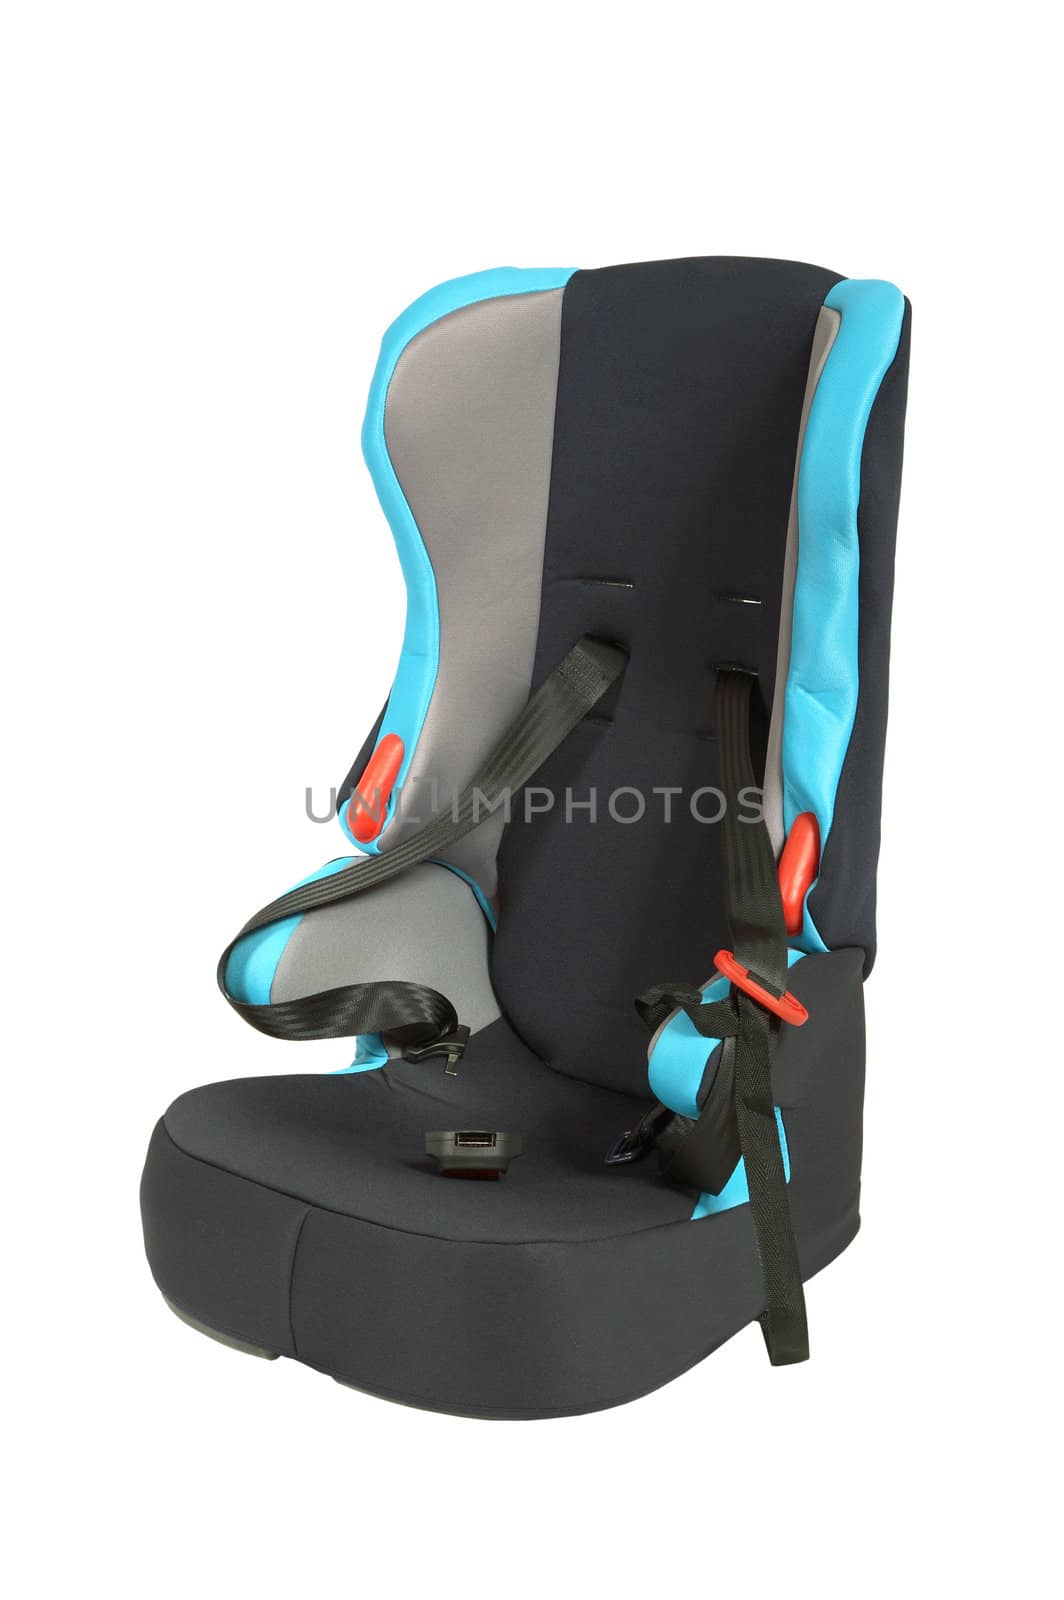 Children's armchair for the car on a white background